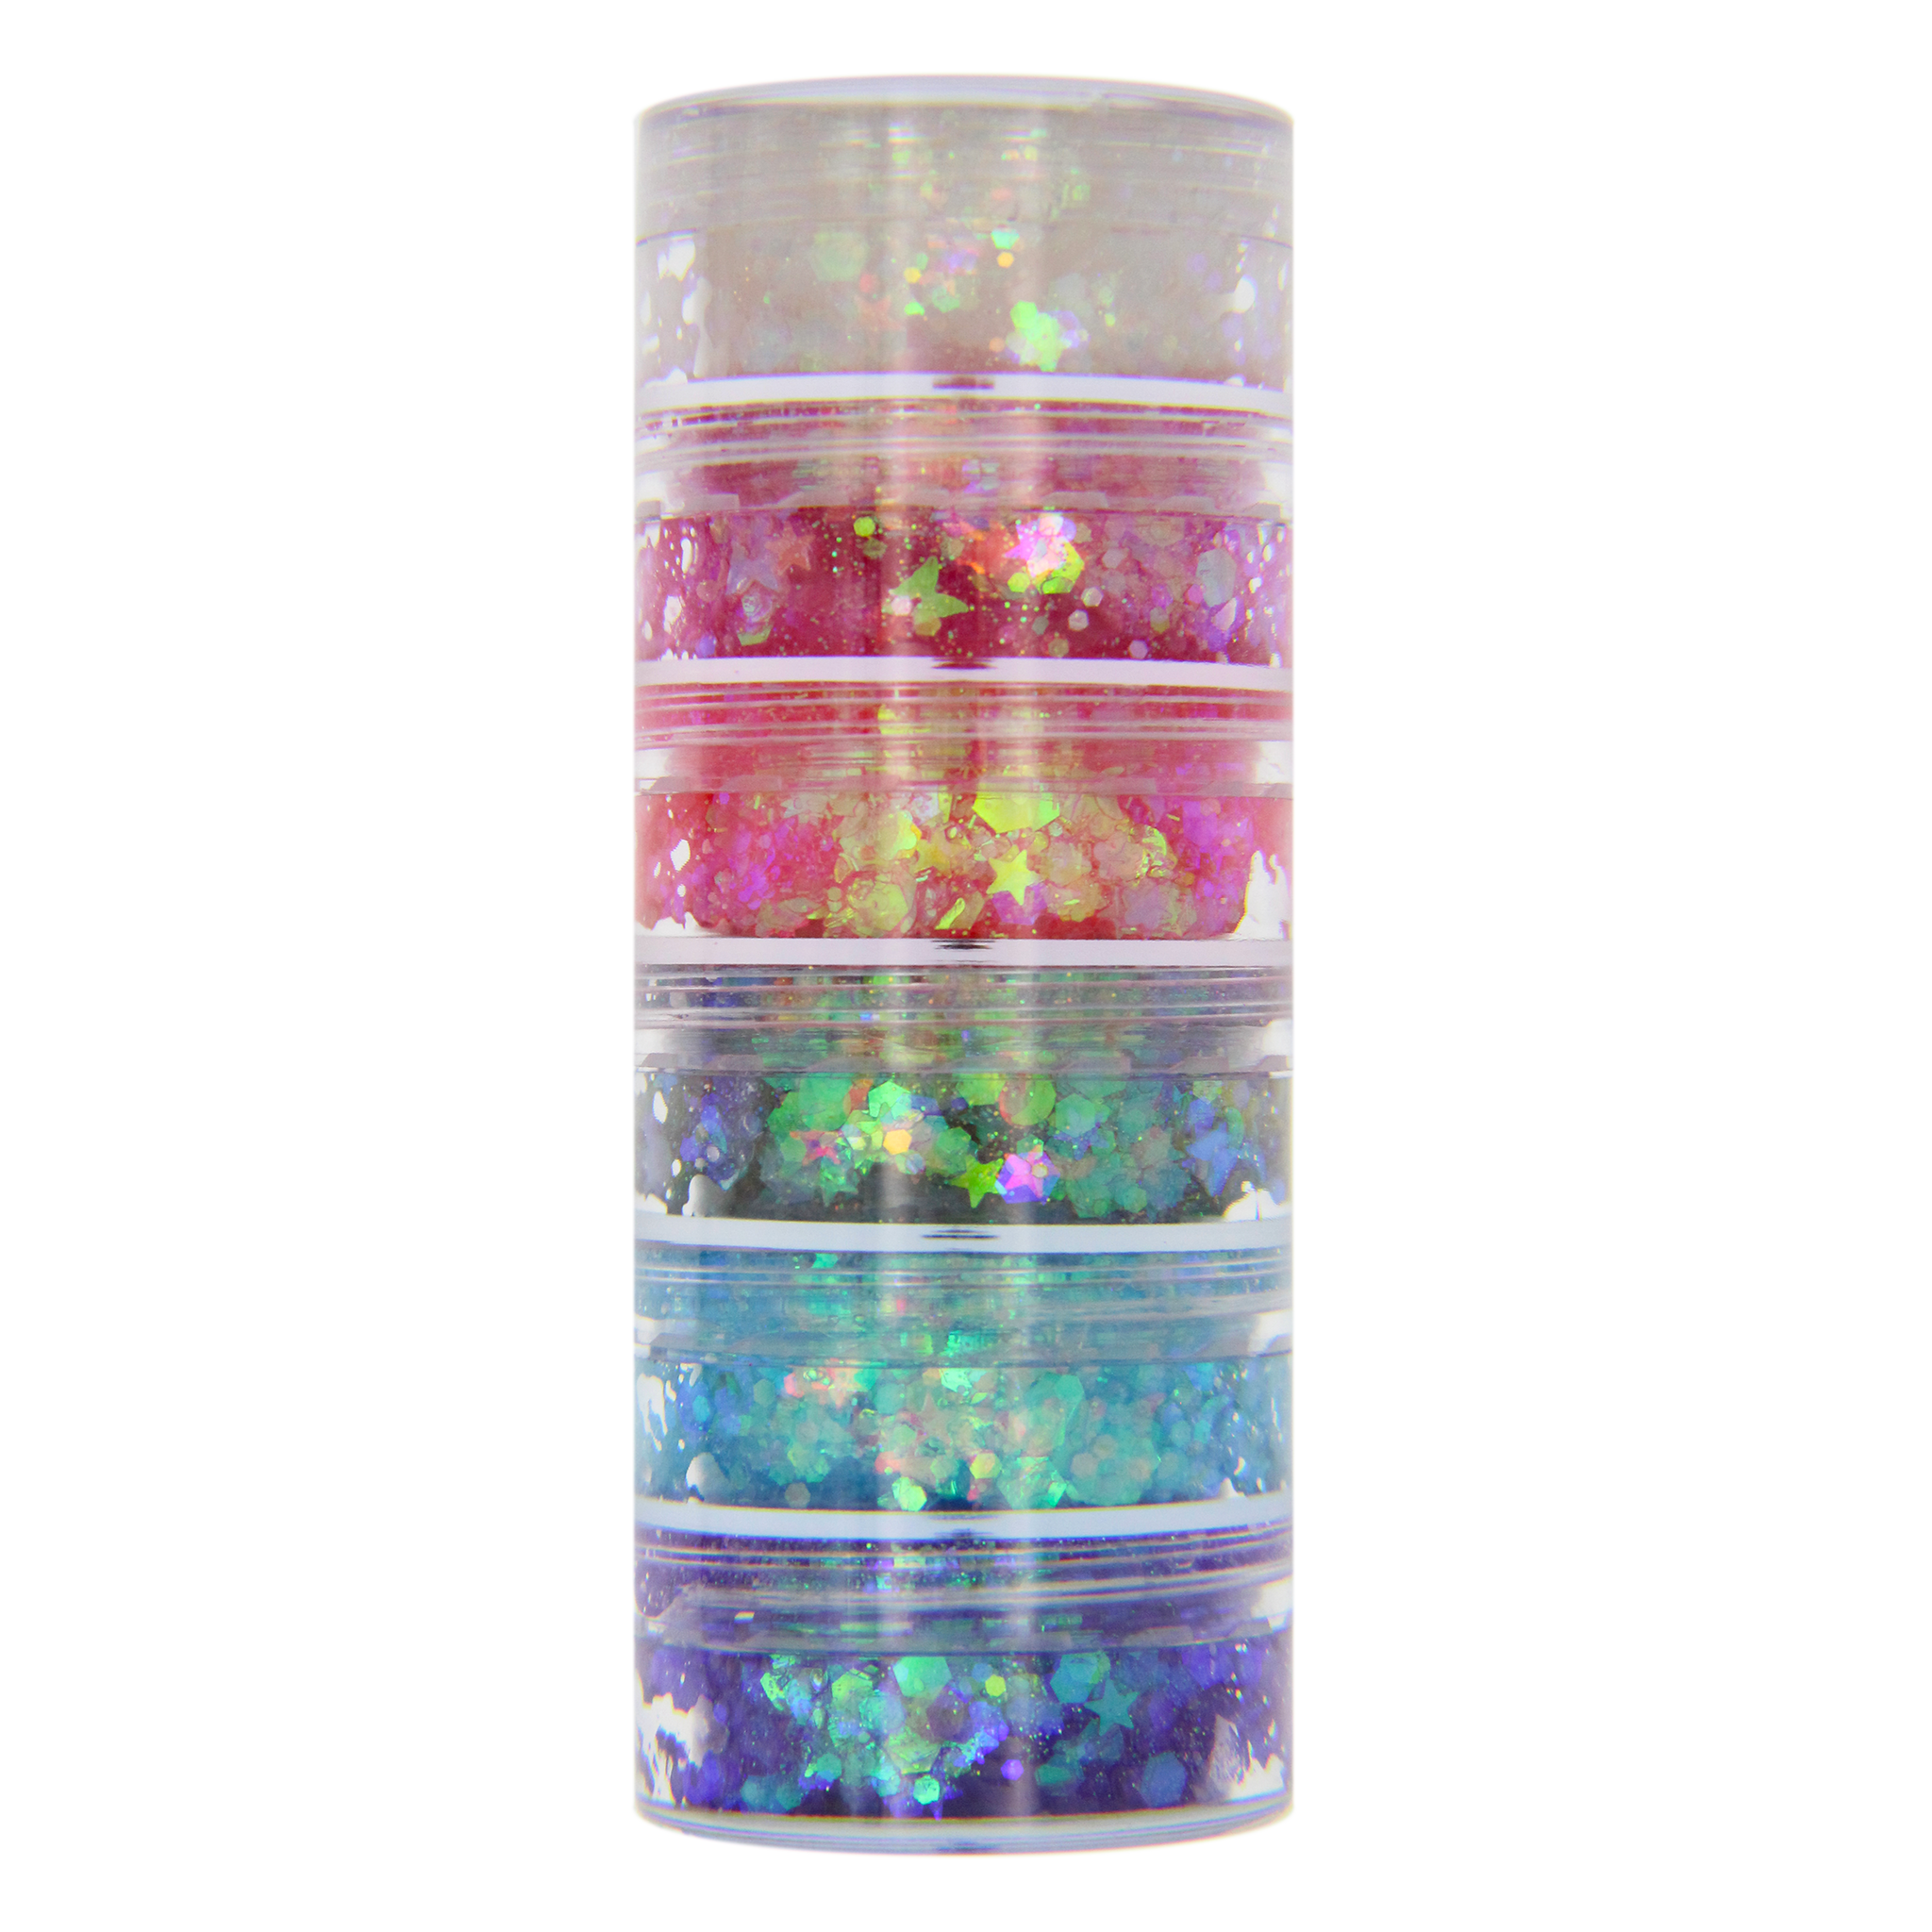 6-Color Iridescent Stacked Jar